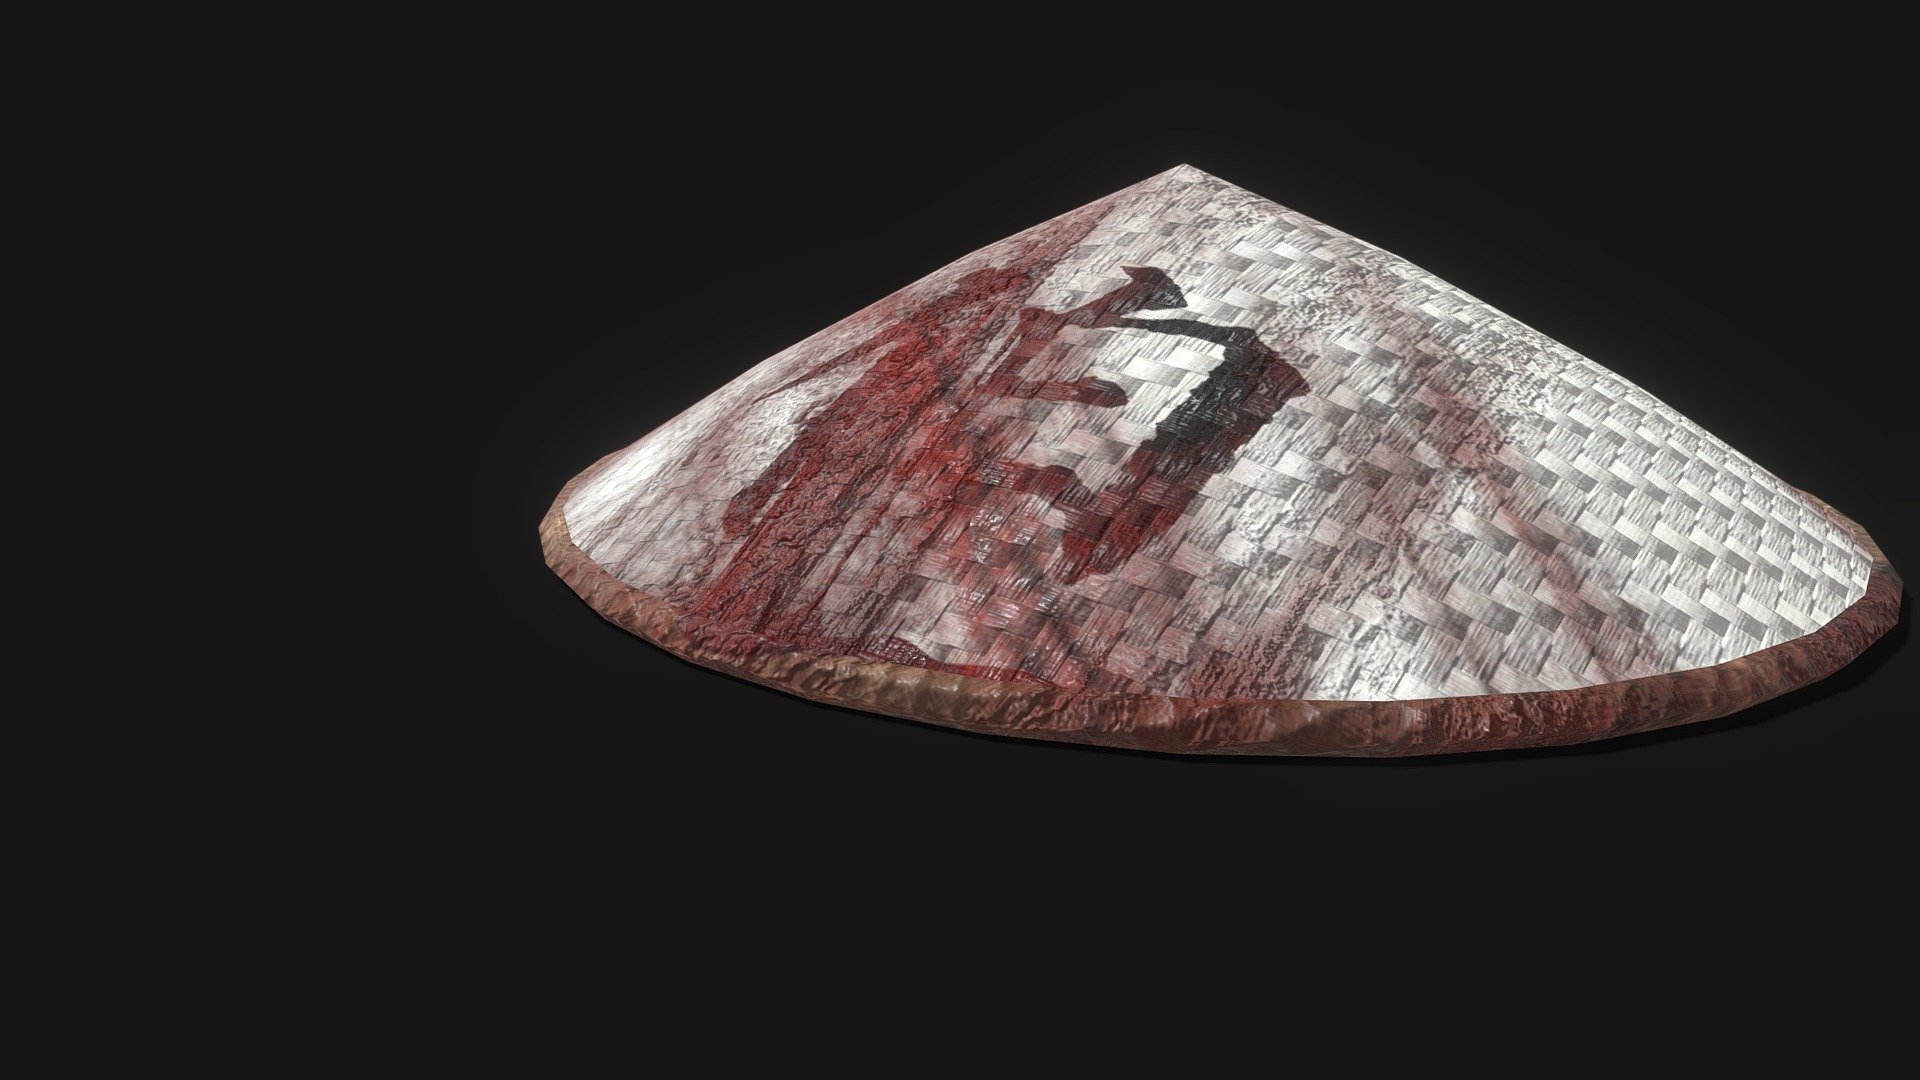 A bloody samurai Rattan Hat!

Designed for games in Low-poly PBR including Albedo, Normal, Metallic, AO, and Roughness 2K textures.

This model from Ferocious Industries can be found in 5 different material skins, and this one uses the ‘Samurai’ texture set.

640 Triangles 3d model